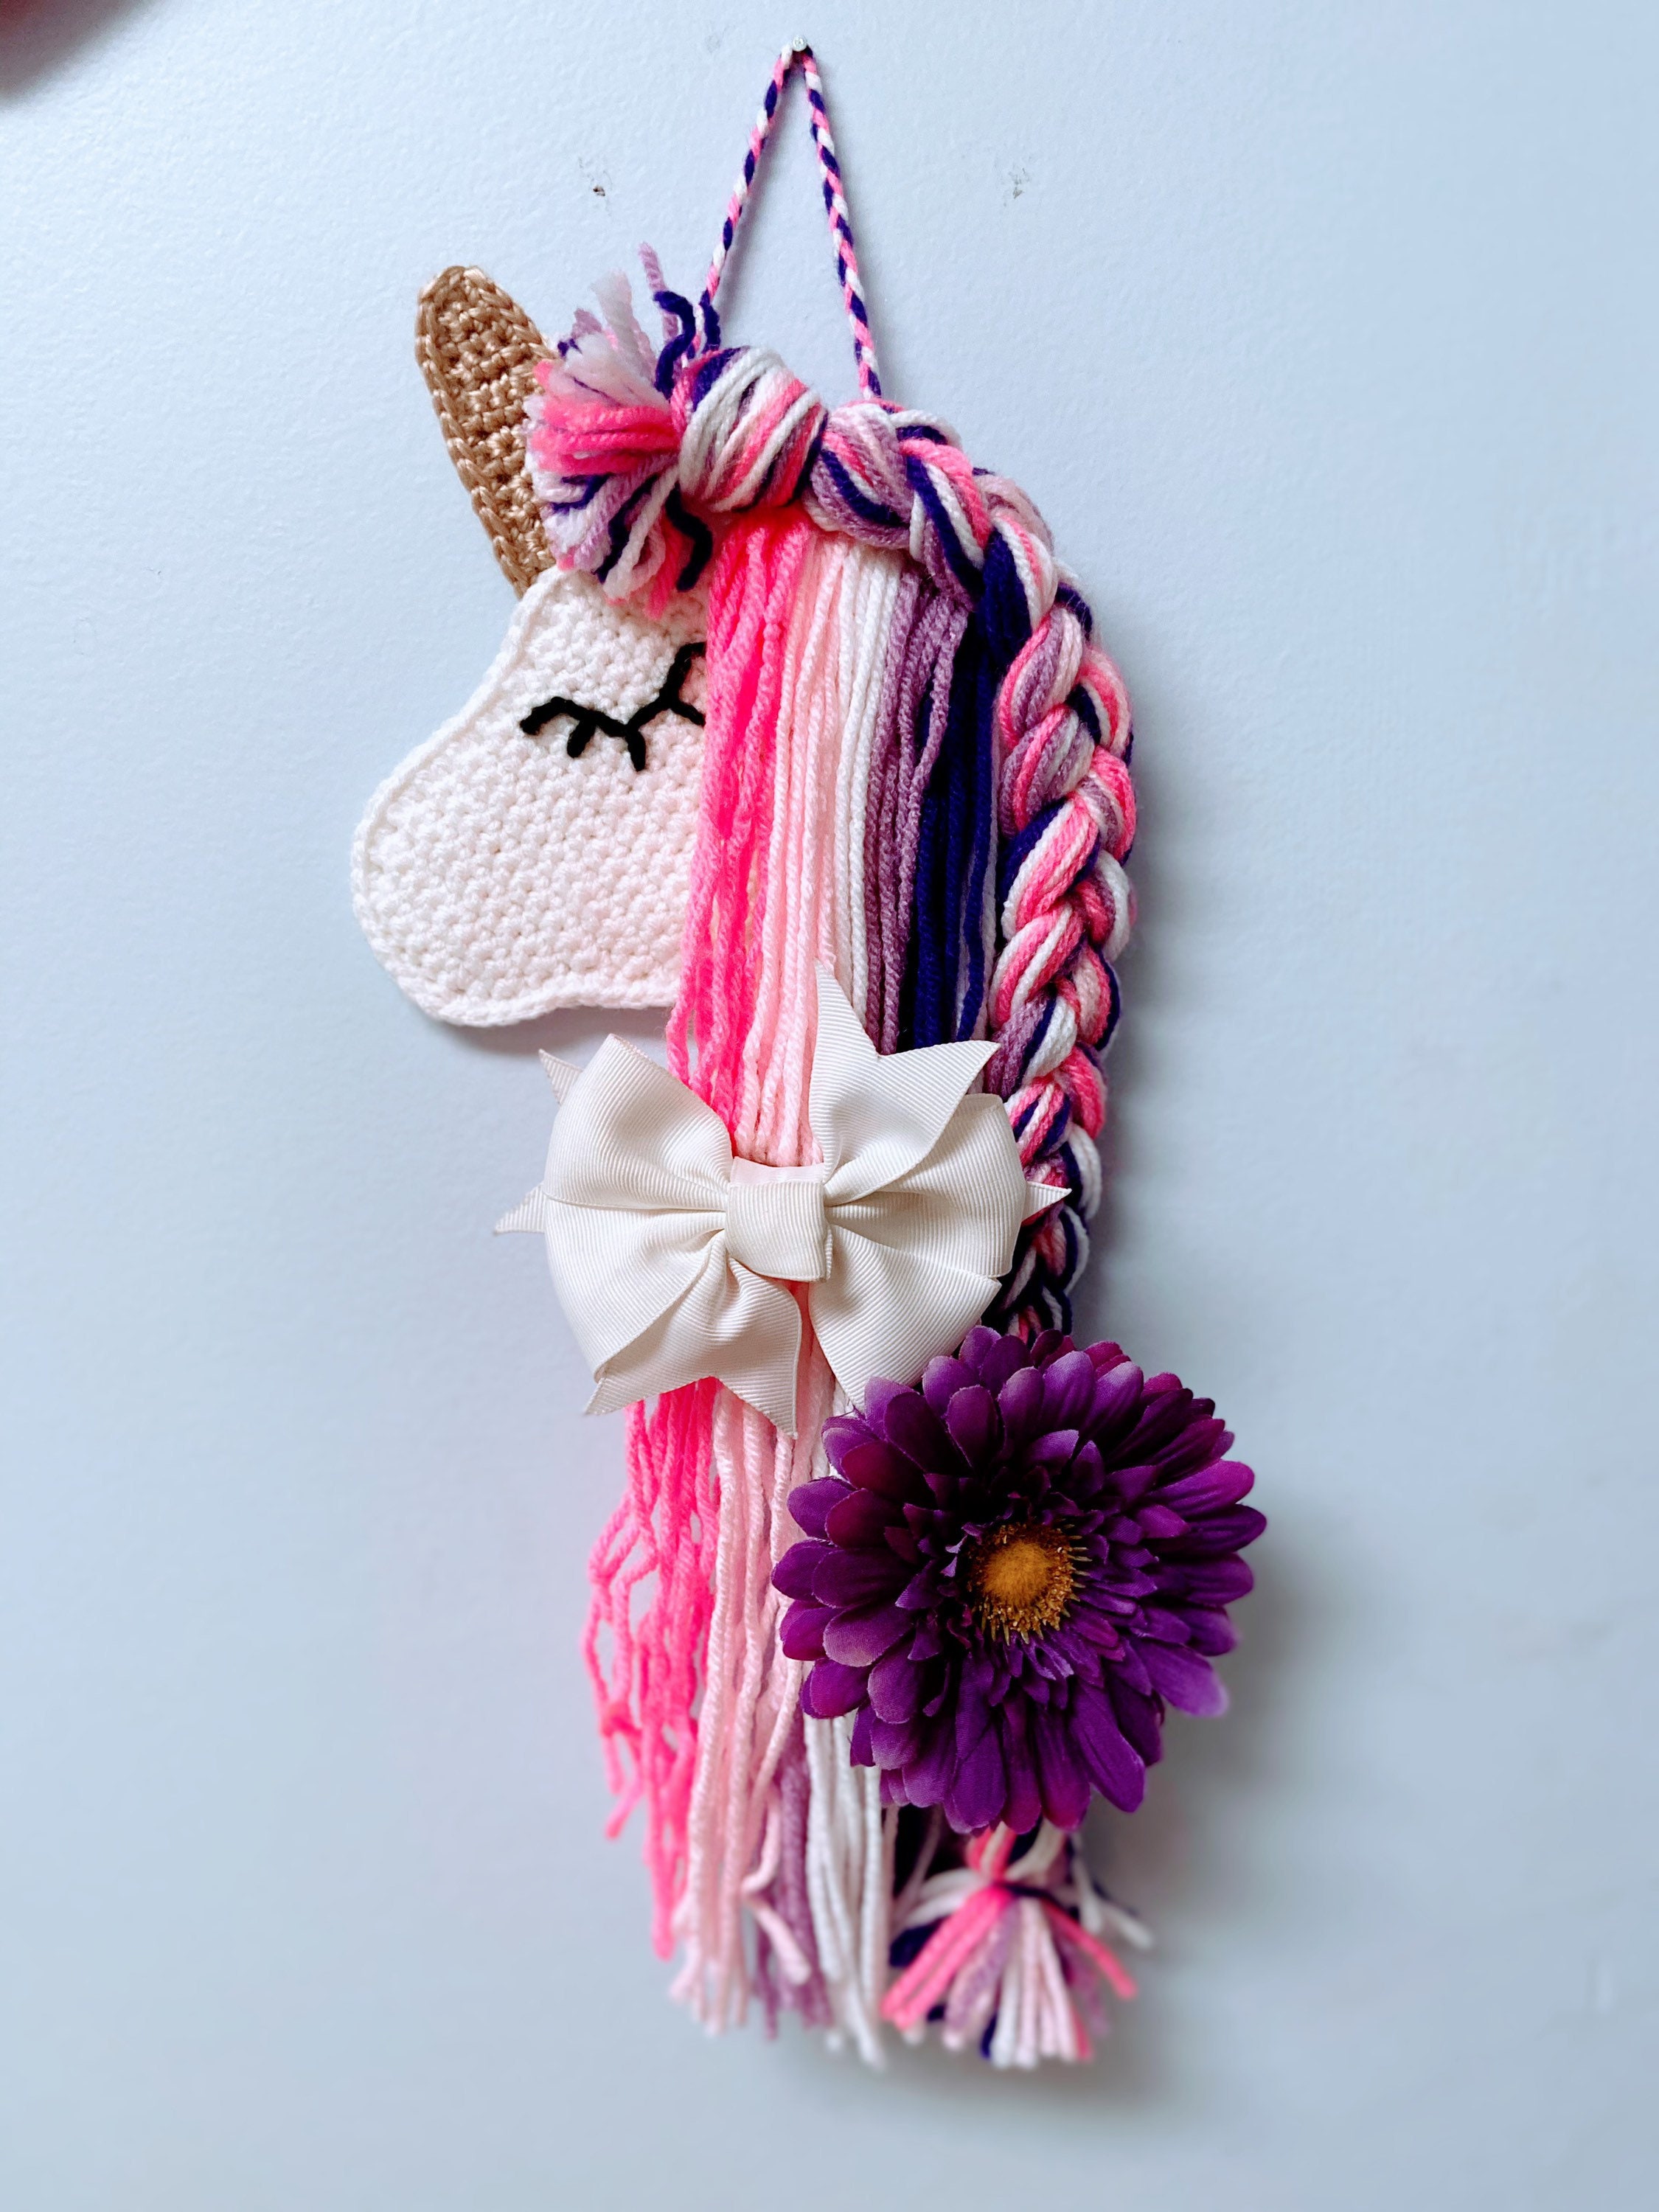 Unicorn Crayon Holder – Bows and Clothes